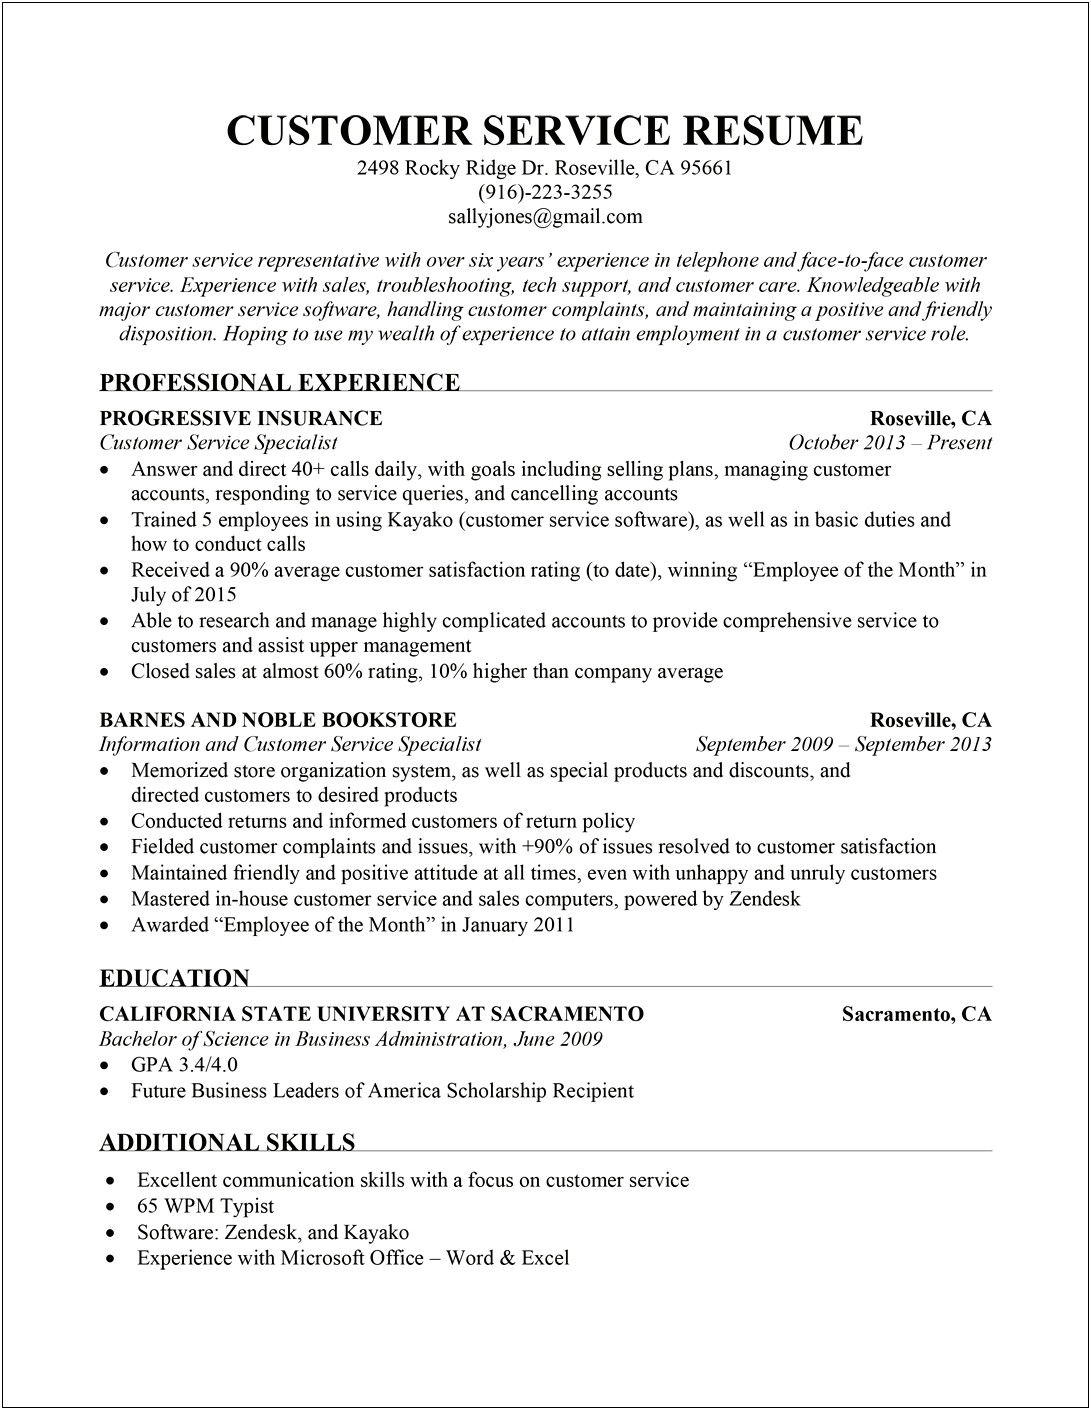 Resume Summary Of Qualifications Examples Customer Service